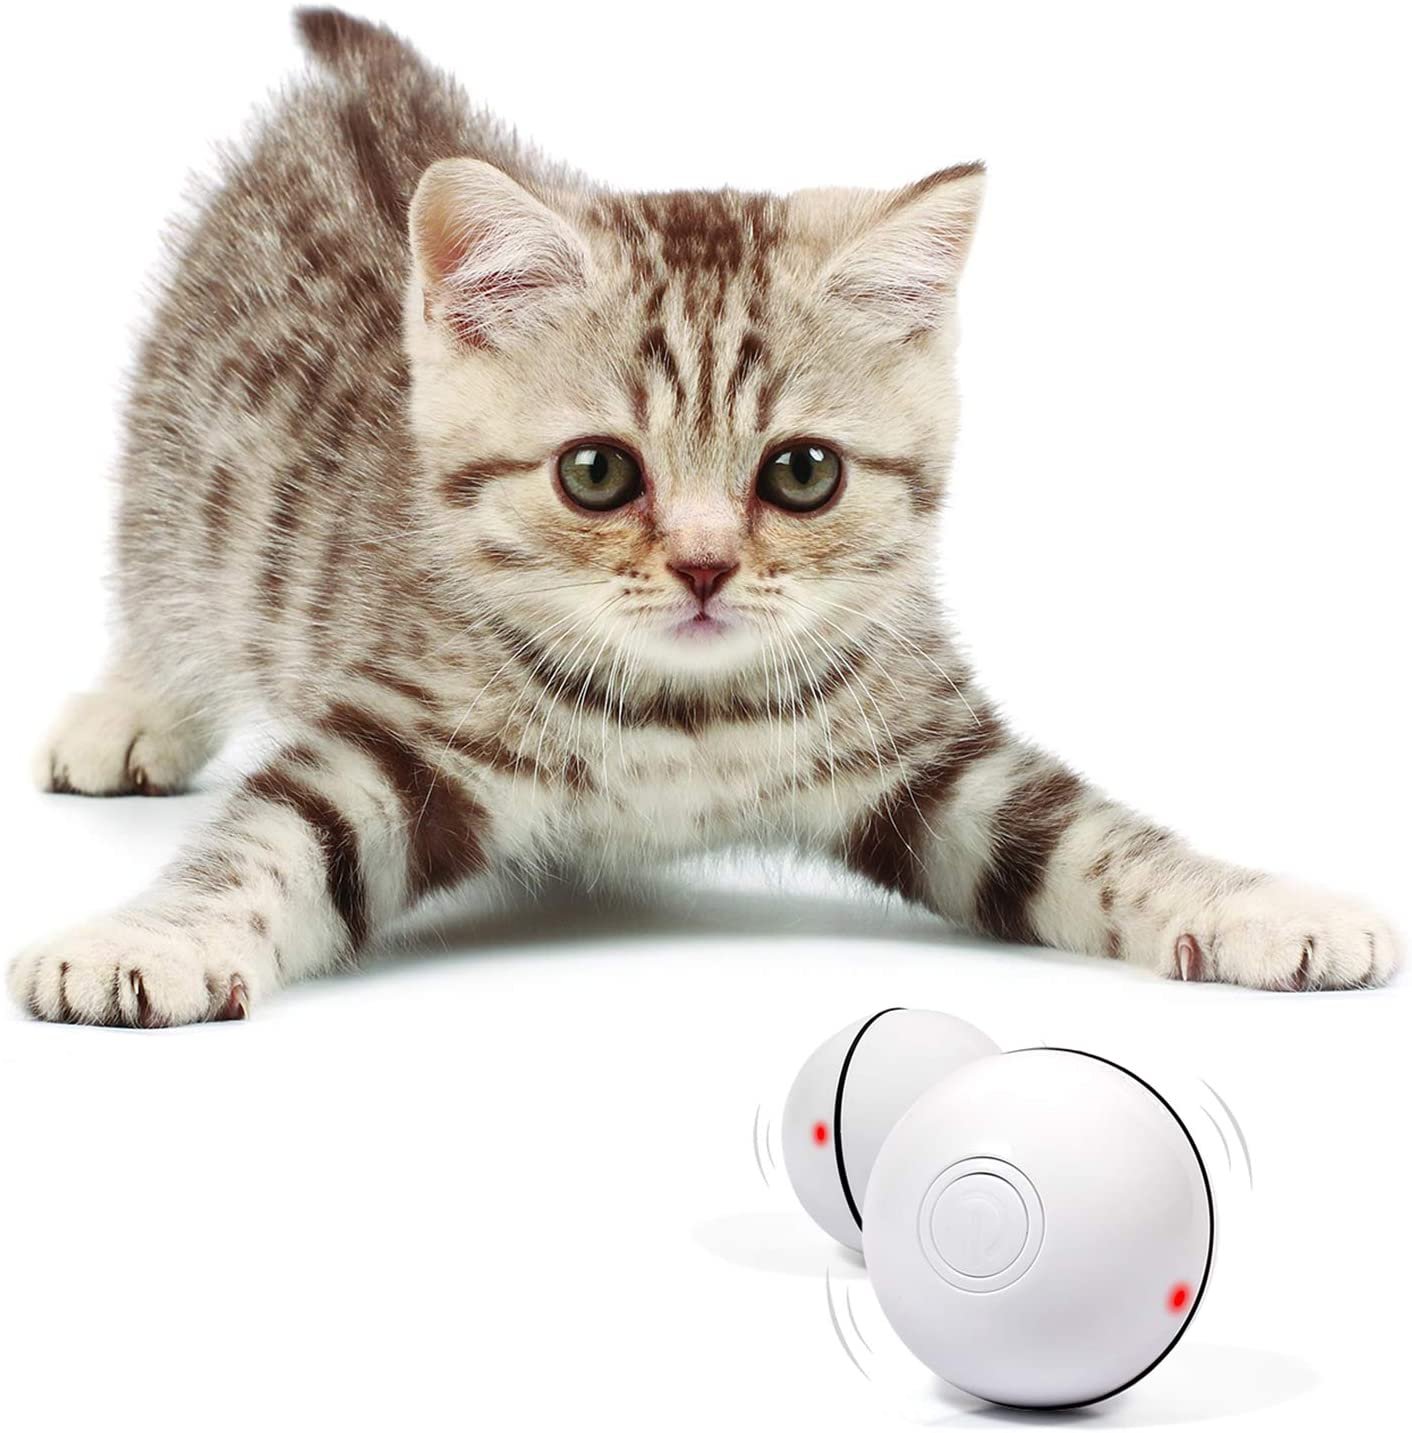 Automatic Sensing Obstacles LED Light Ball Toys for Indoor Kitten/Cats Attached with Feather Comgoo Interactive Cat Toys Automatic All Floors/Carpet Available 